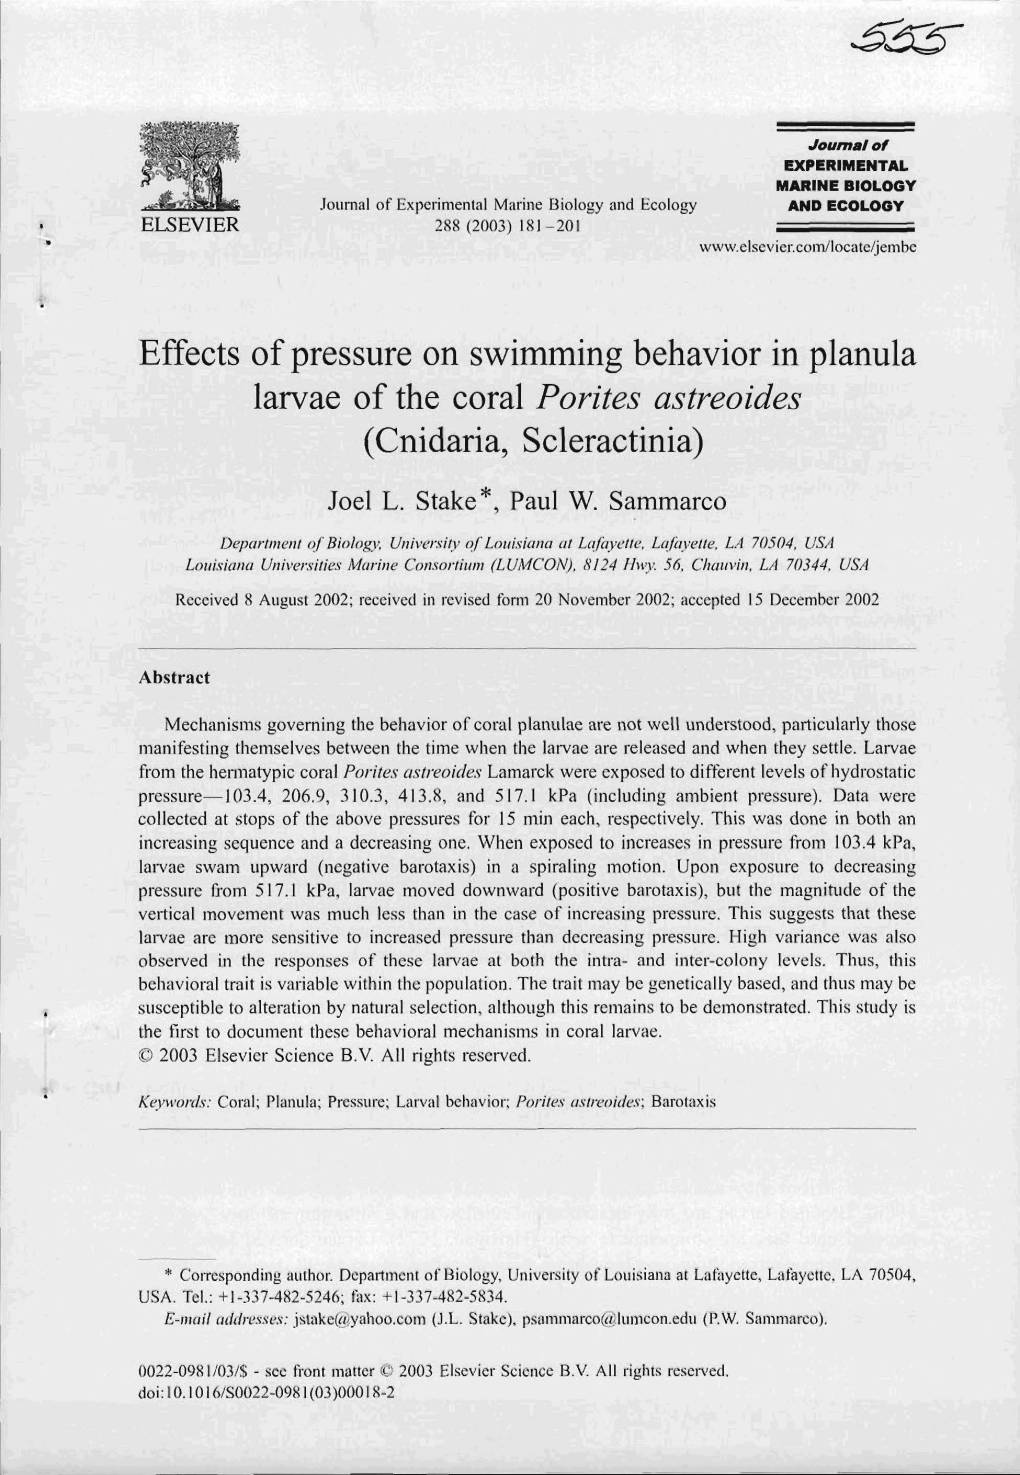 Effects of Pressure on Swimming Behavior in Planula Larvae of the Coral Porites Astreoides (Cnidaria, Scleractinia)